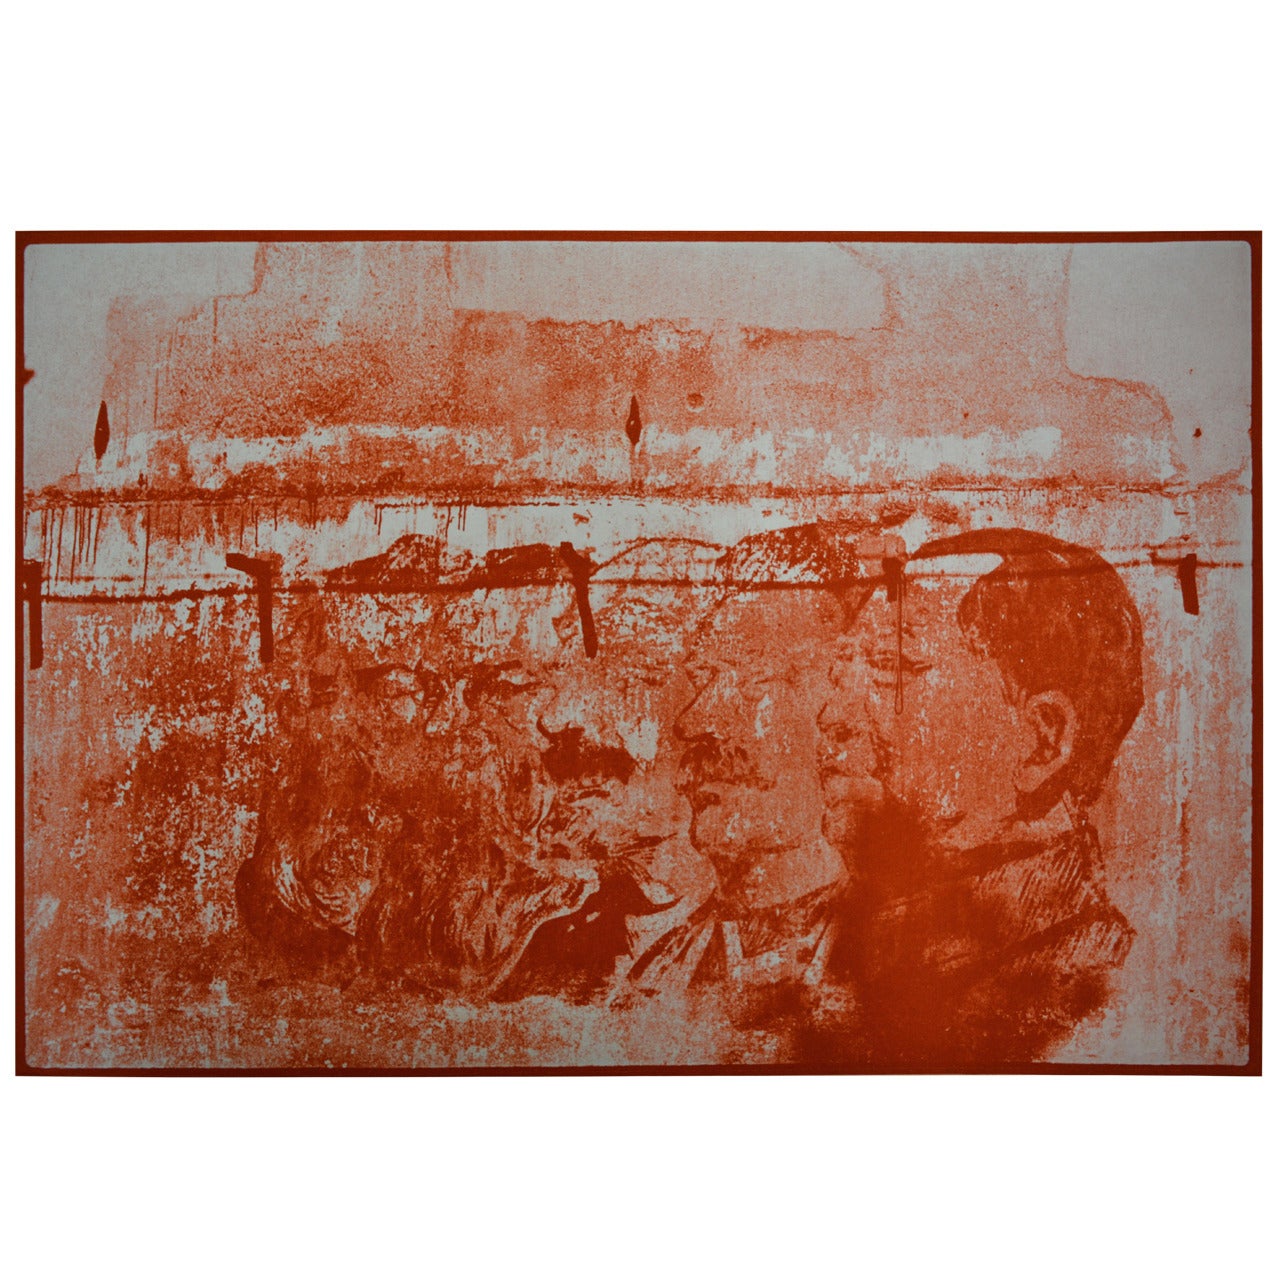 "Study for Chinese Summerhall" Print by Robert Rauschenberg, 1983